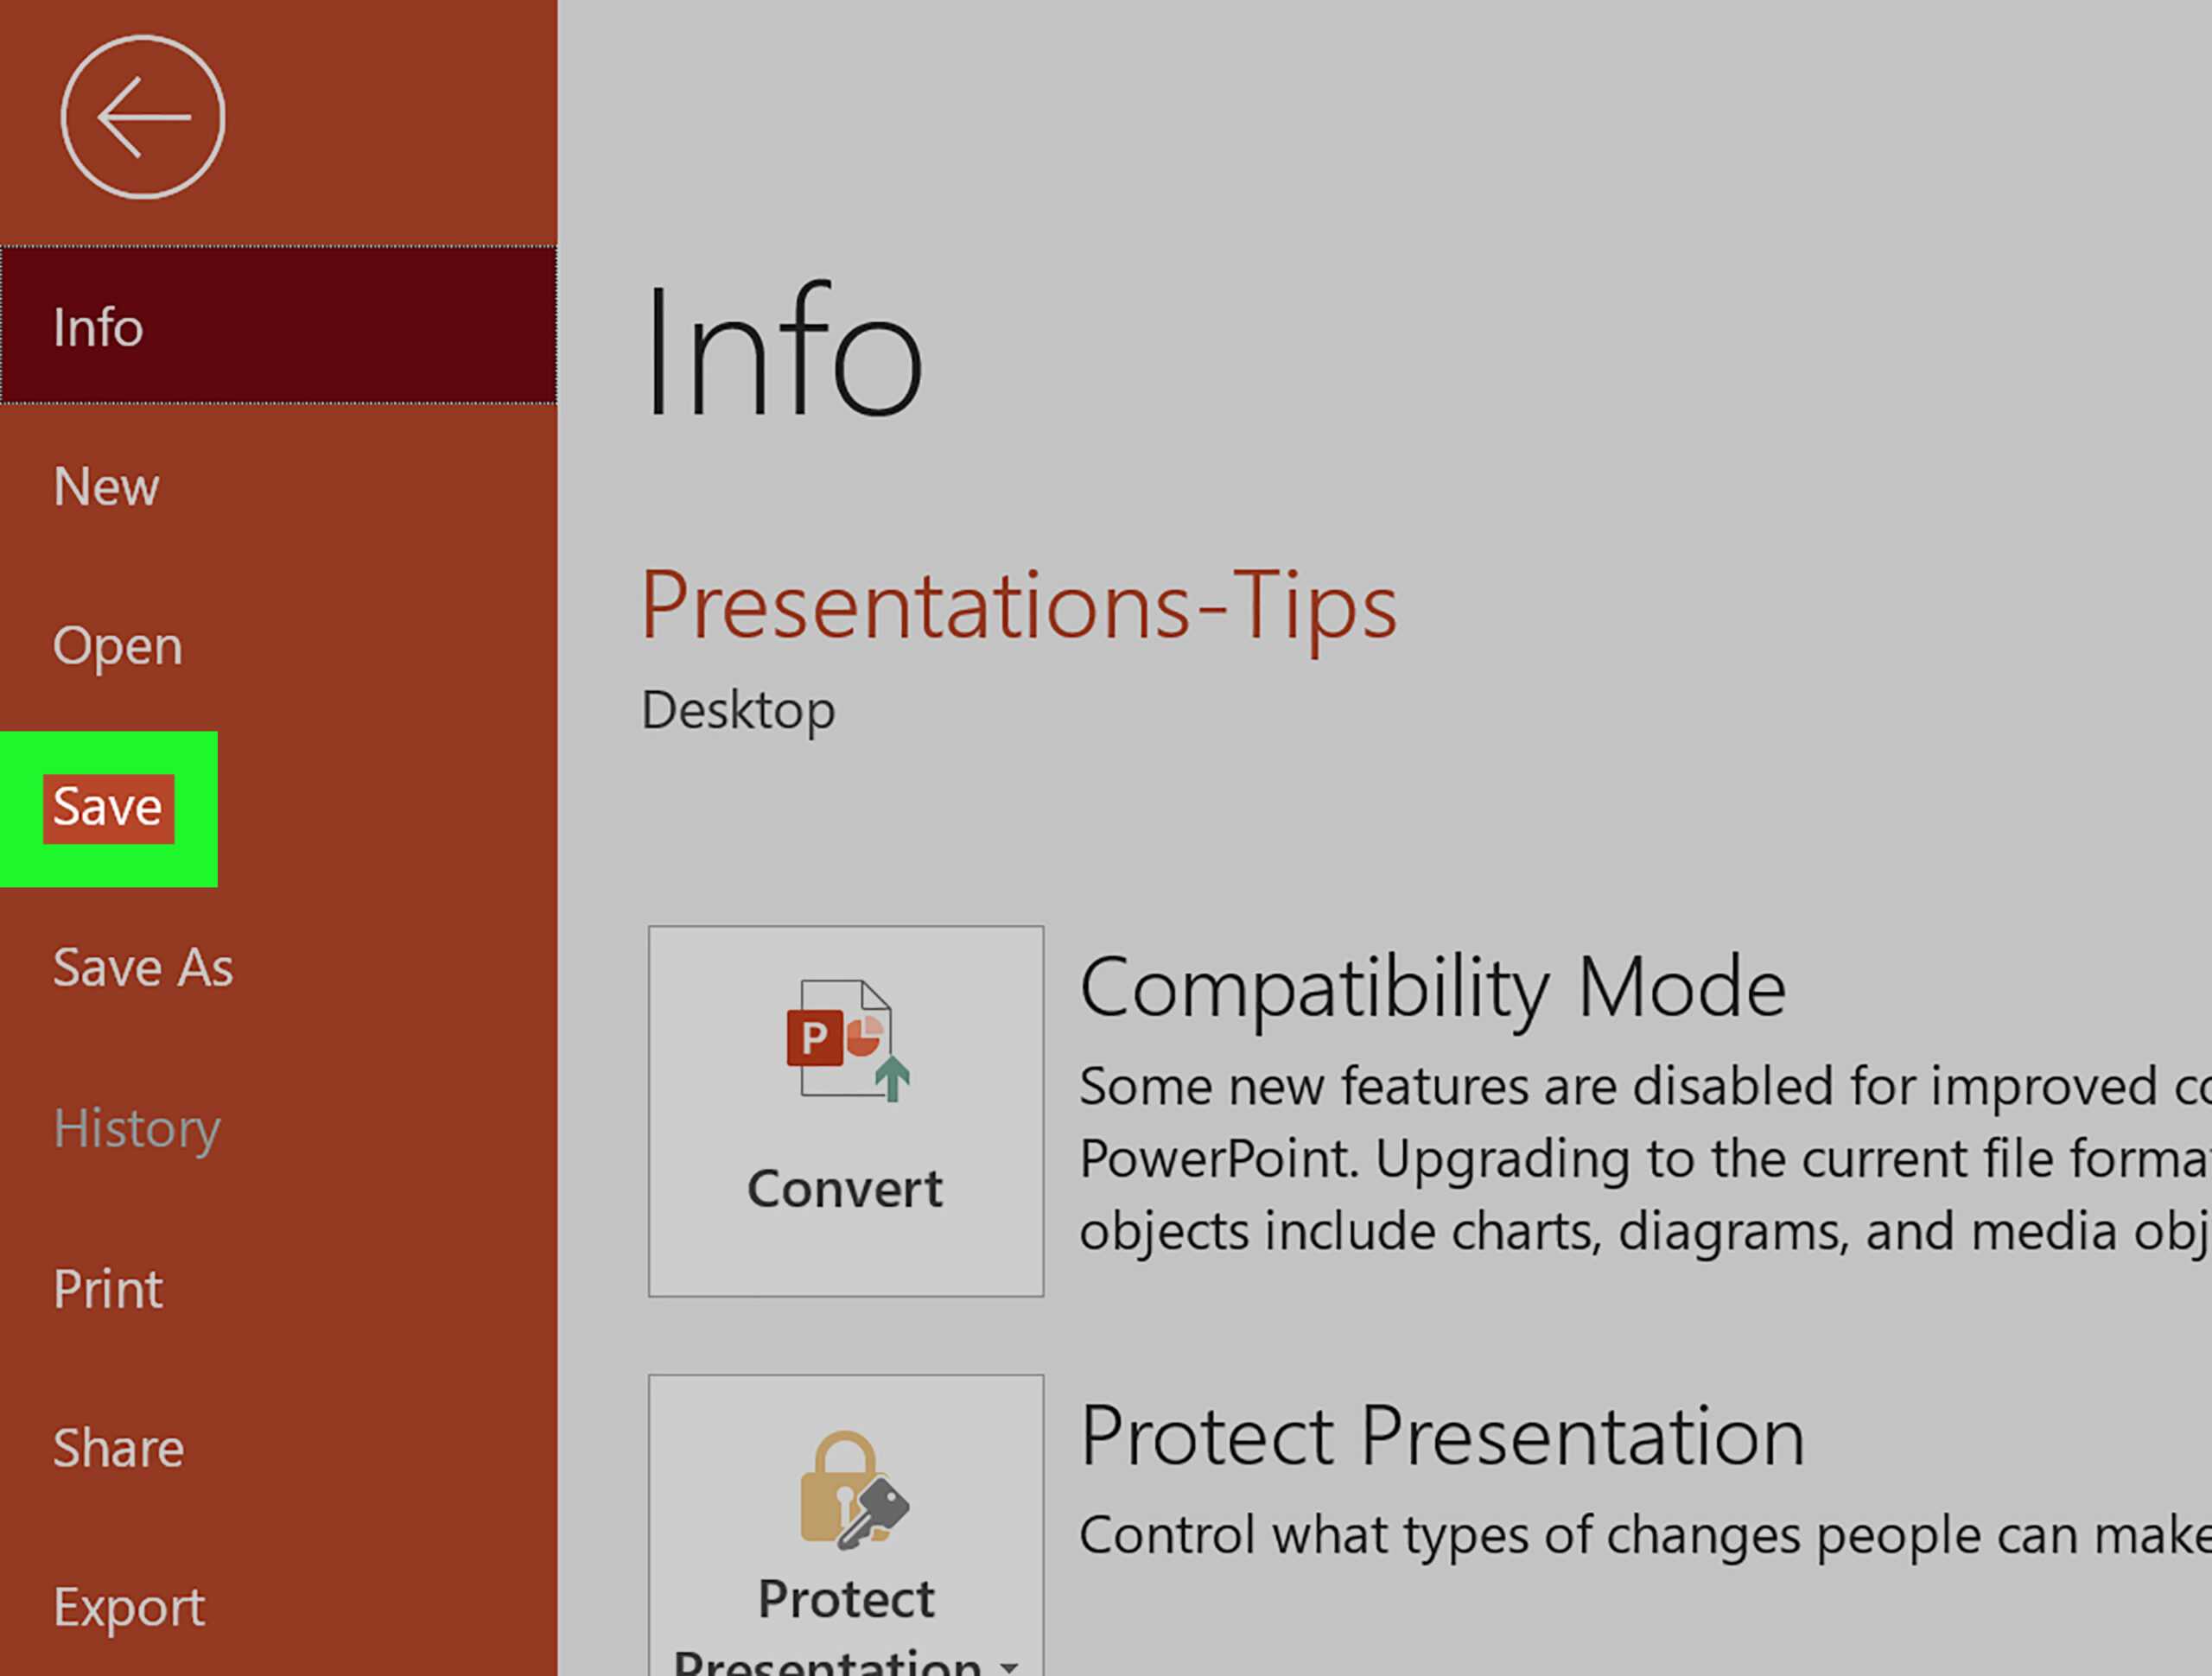 How To Edit A Powerpoint Template: 6 Steps (With Pictures) Inside How To Edit A Powerpoint Template